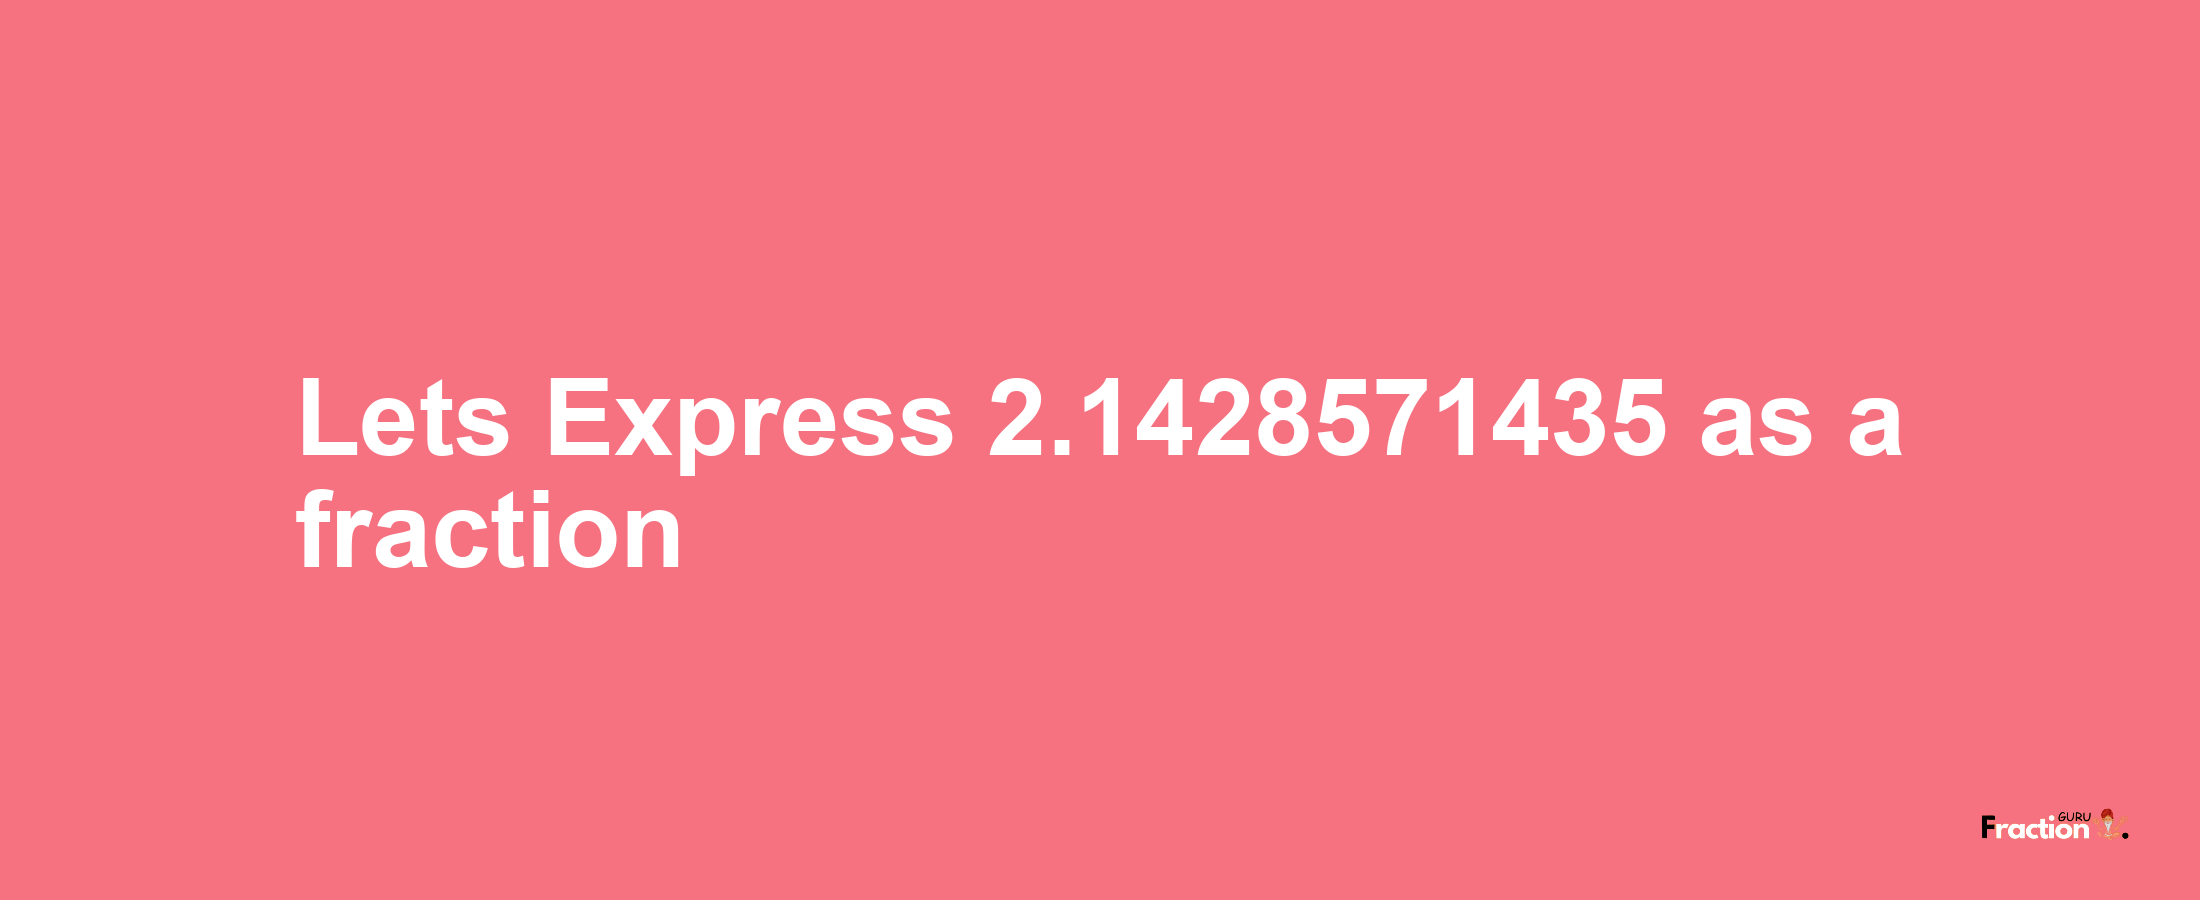 Lets Express 2.1428571435 as afraction